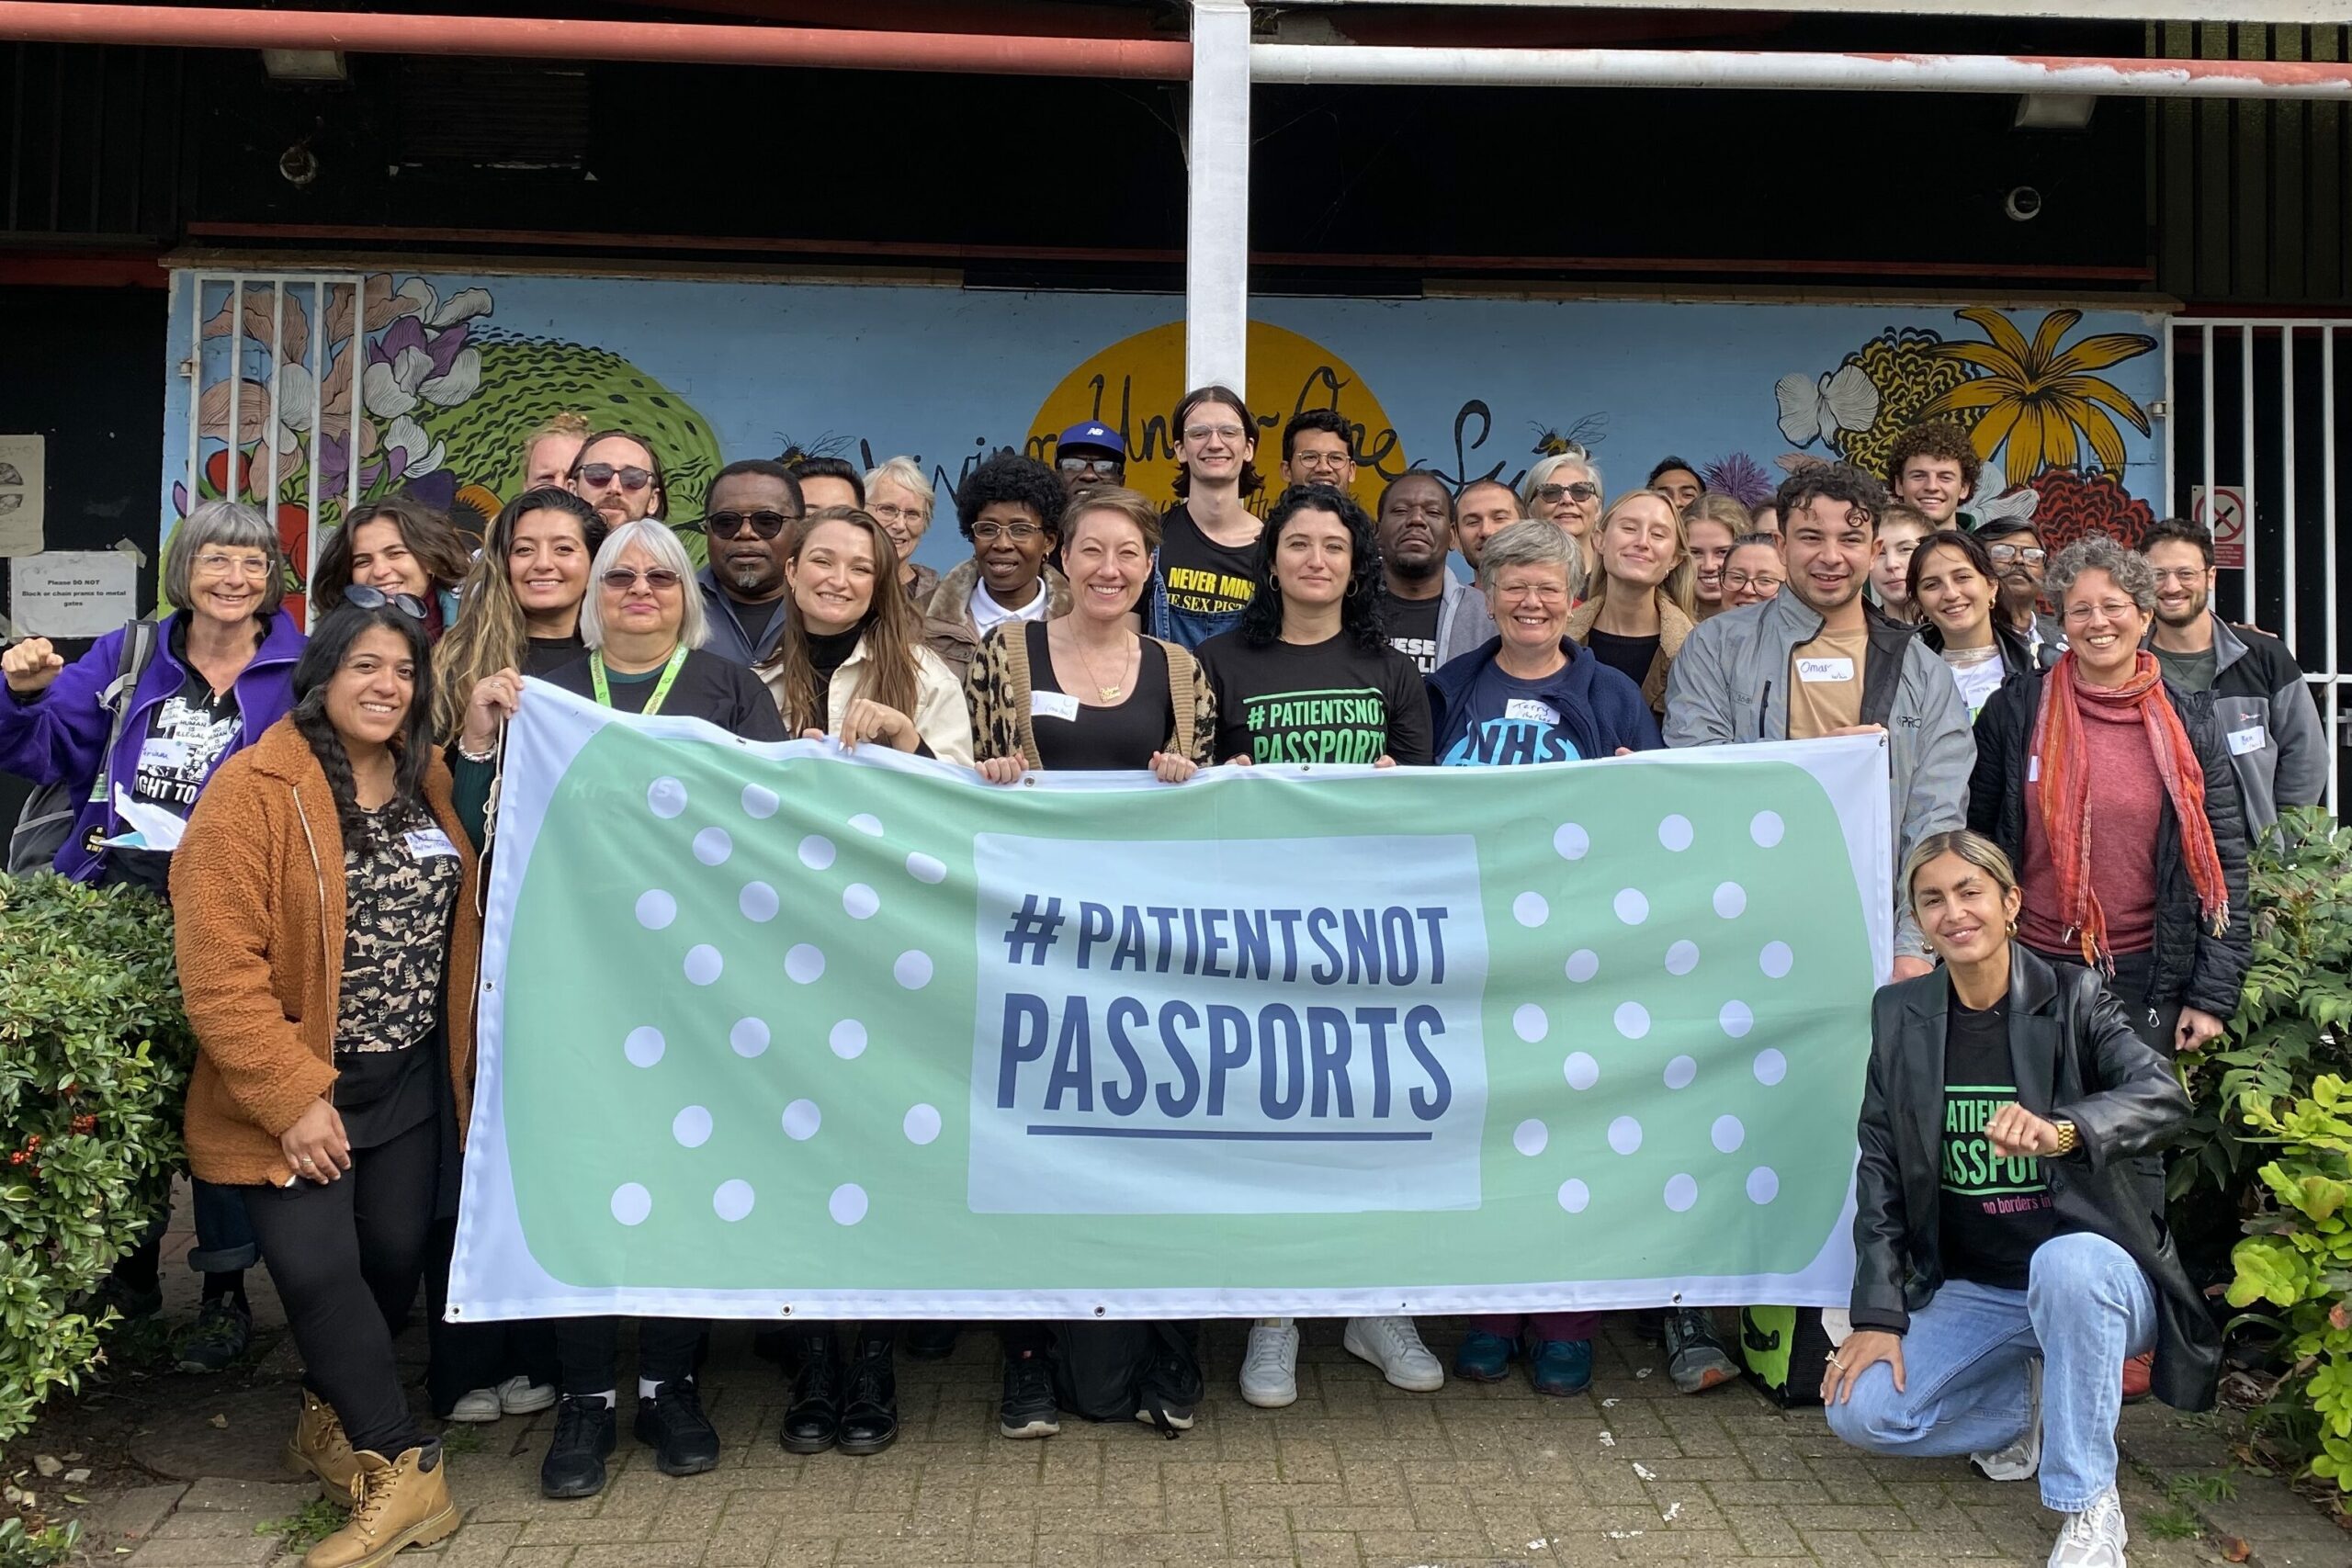 Image of Patients Not Passports campaigners with a green banner saying 'Patients Not Passports' outside Living Under One Sun Community Centre